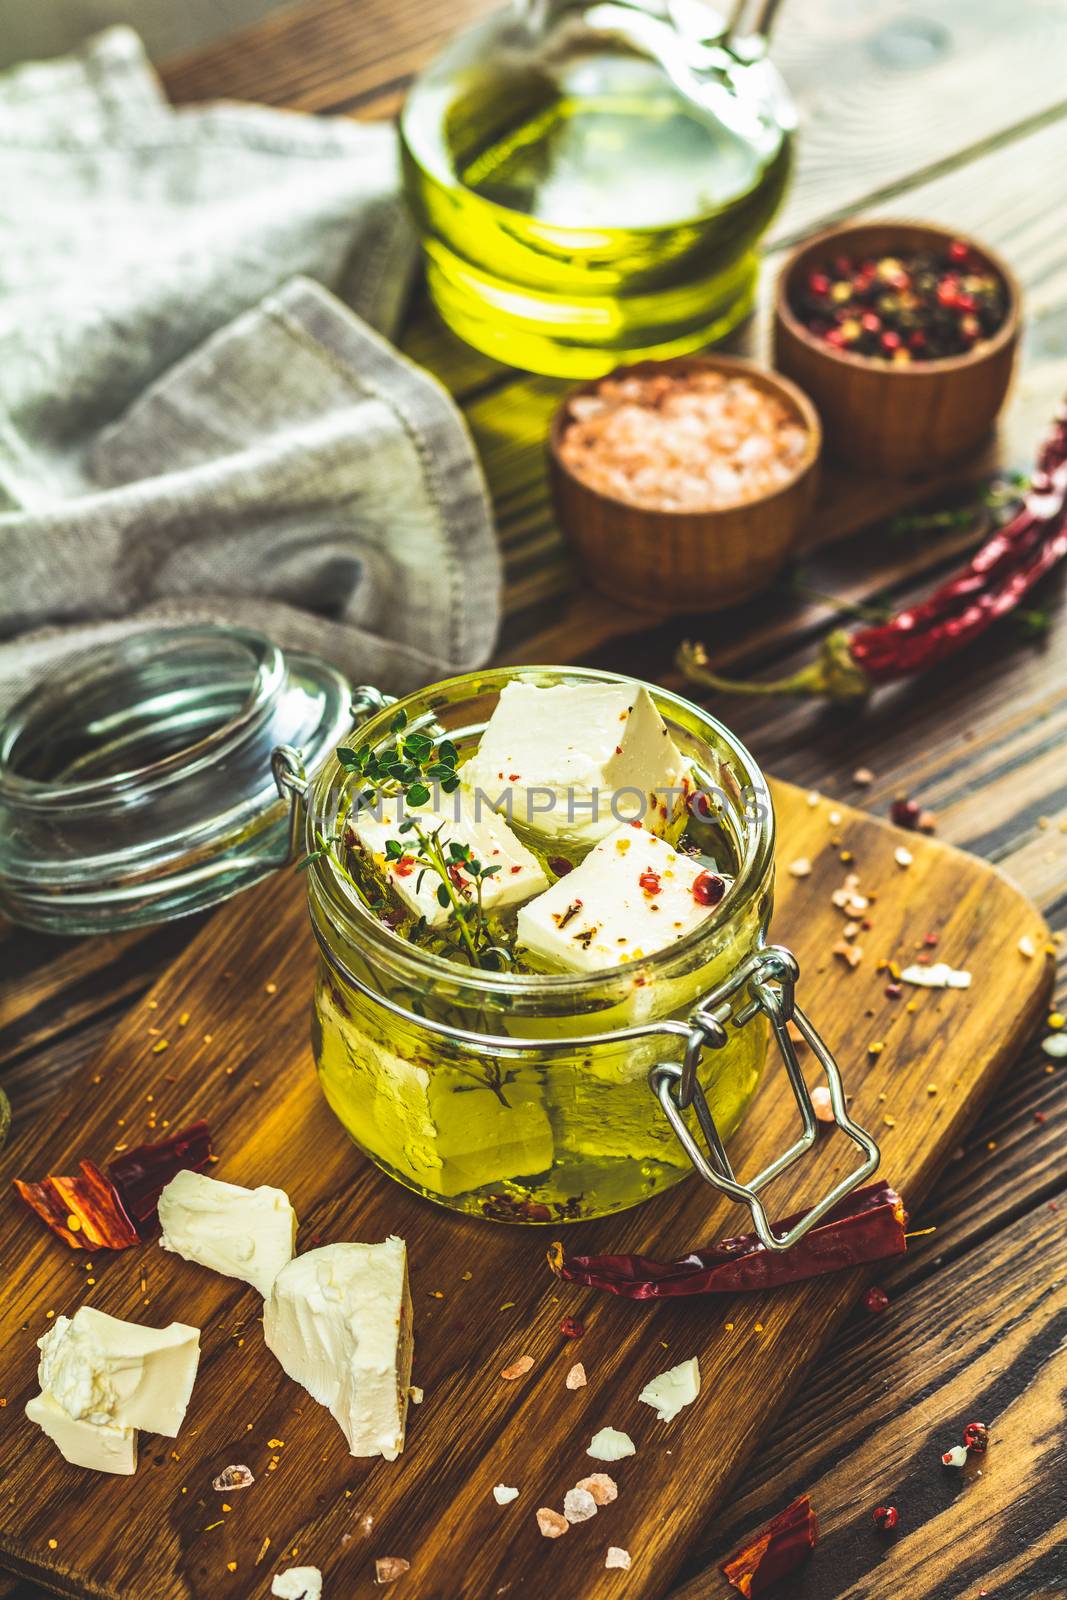 Feta cheese marinated in olive oil with spices by ArtSvitlyna